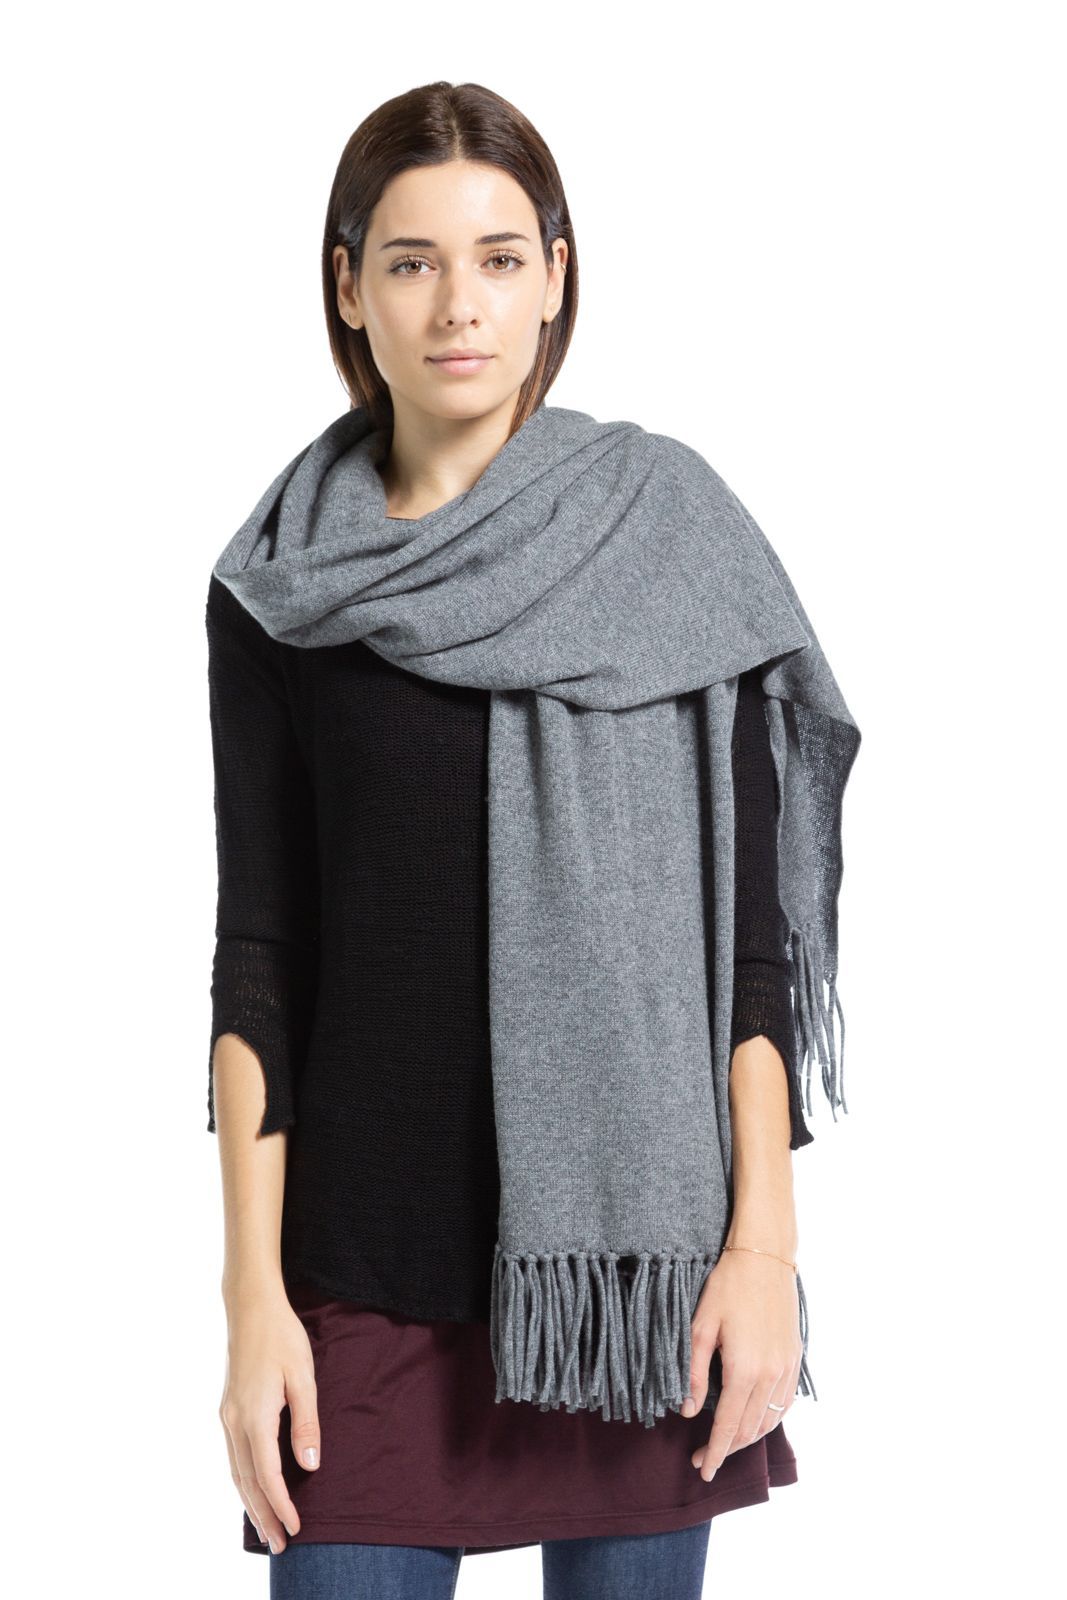 Women's 100% Pure Cashmere Knit Shawl Wrap with Fringe and Gift Box Womens>Accessories>Scarf Fishers Finery Iron Gate 